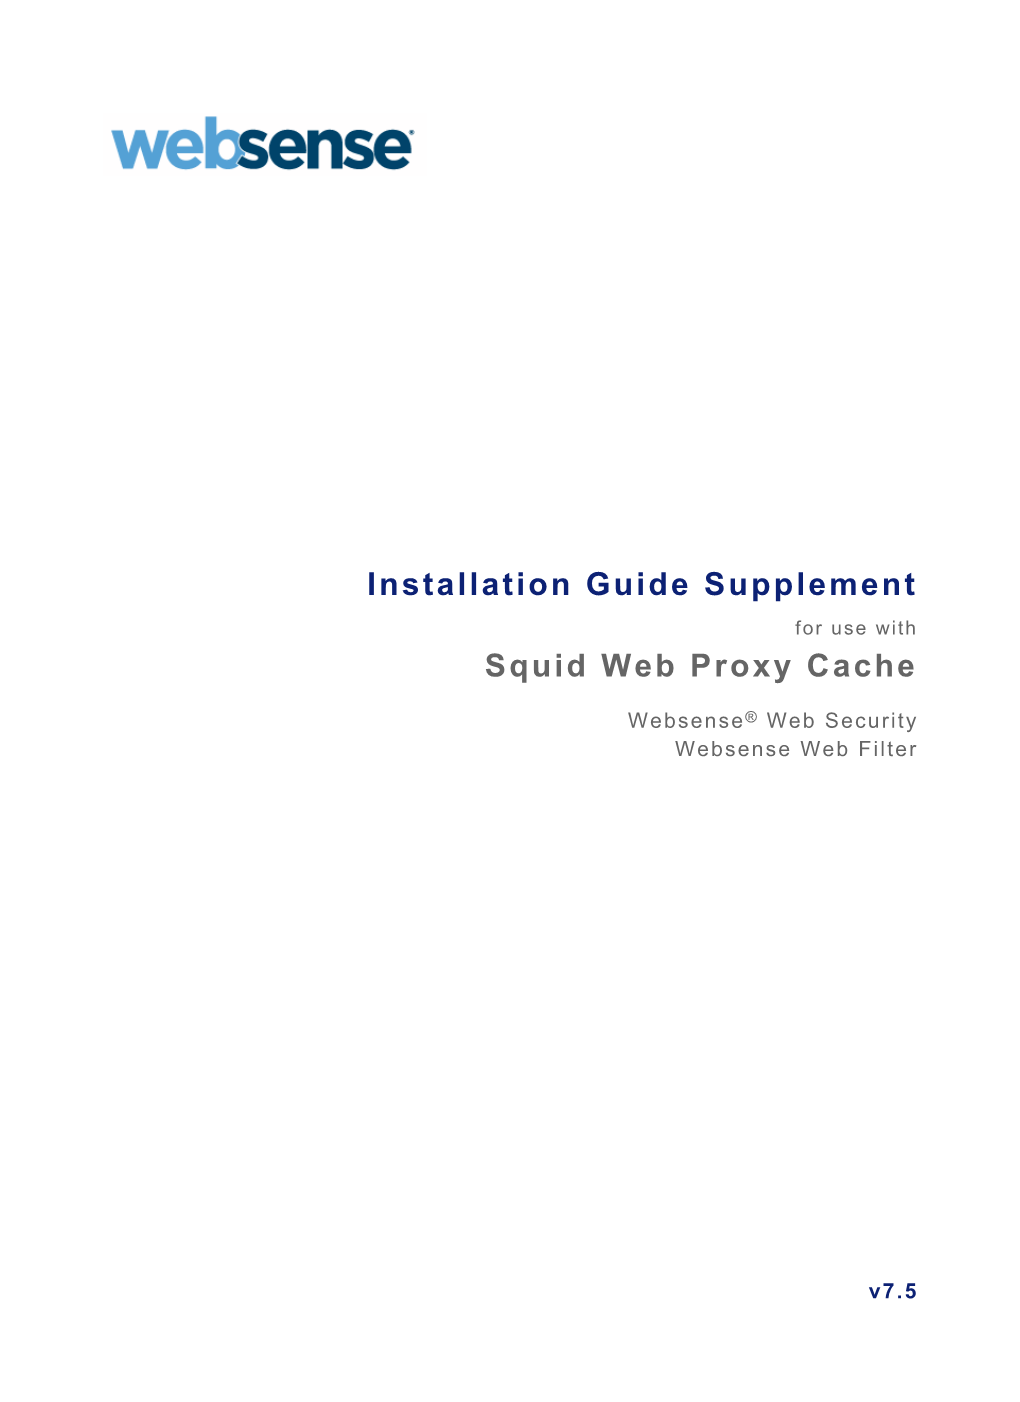 Installation Guide Supplement for Use with Squid Web Proxy Cache (WWS